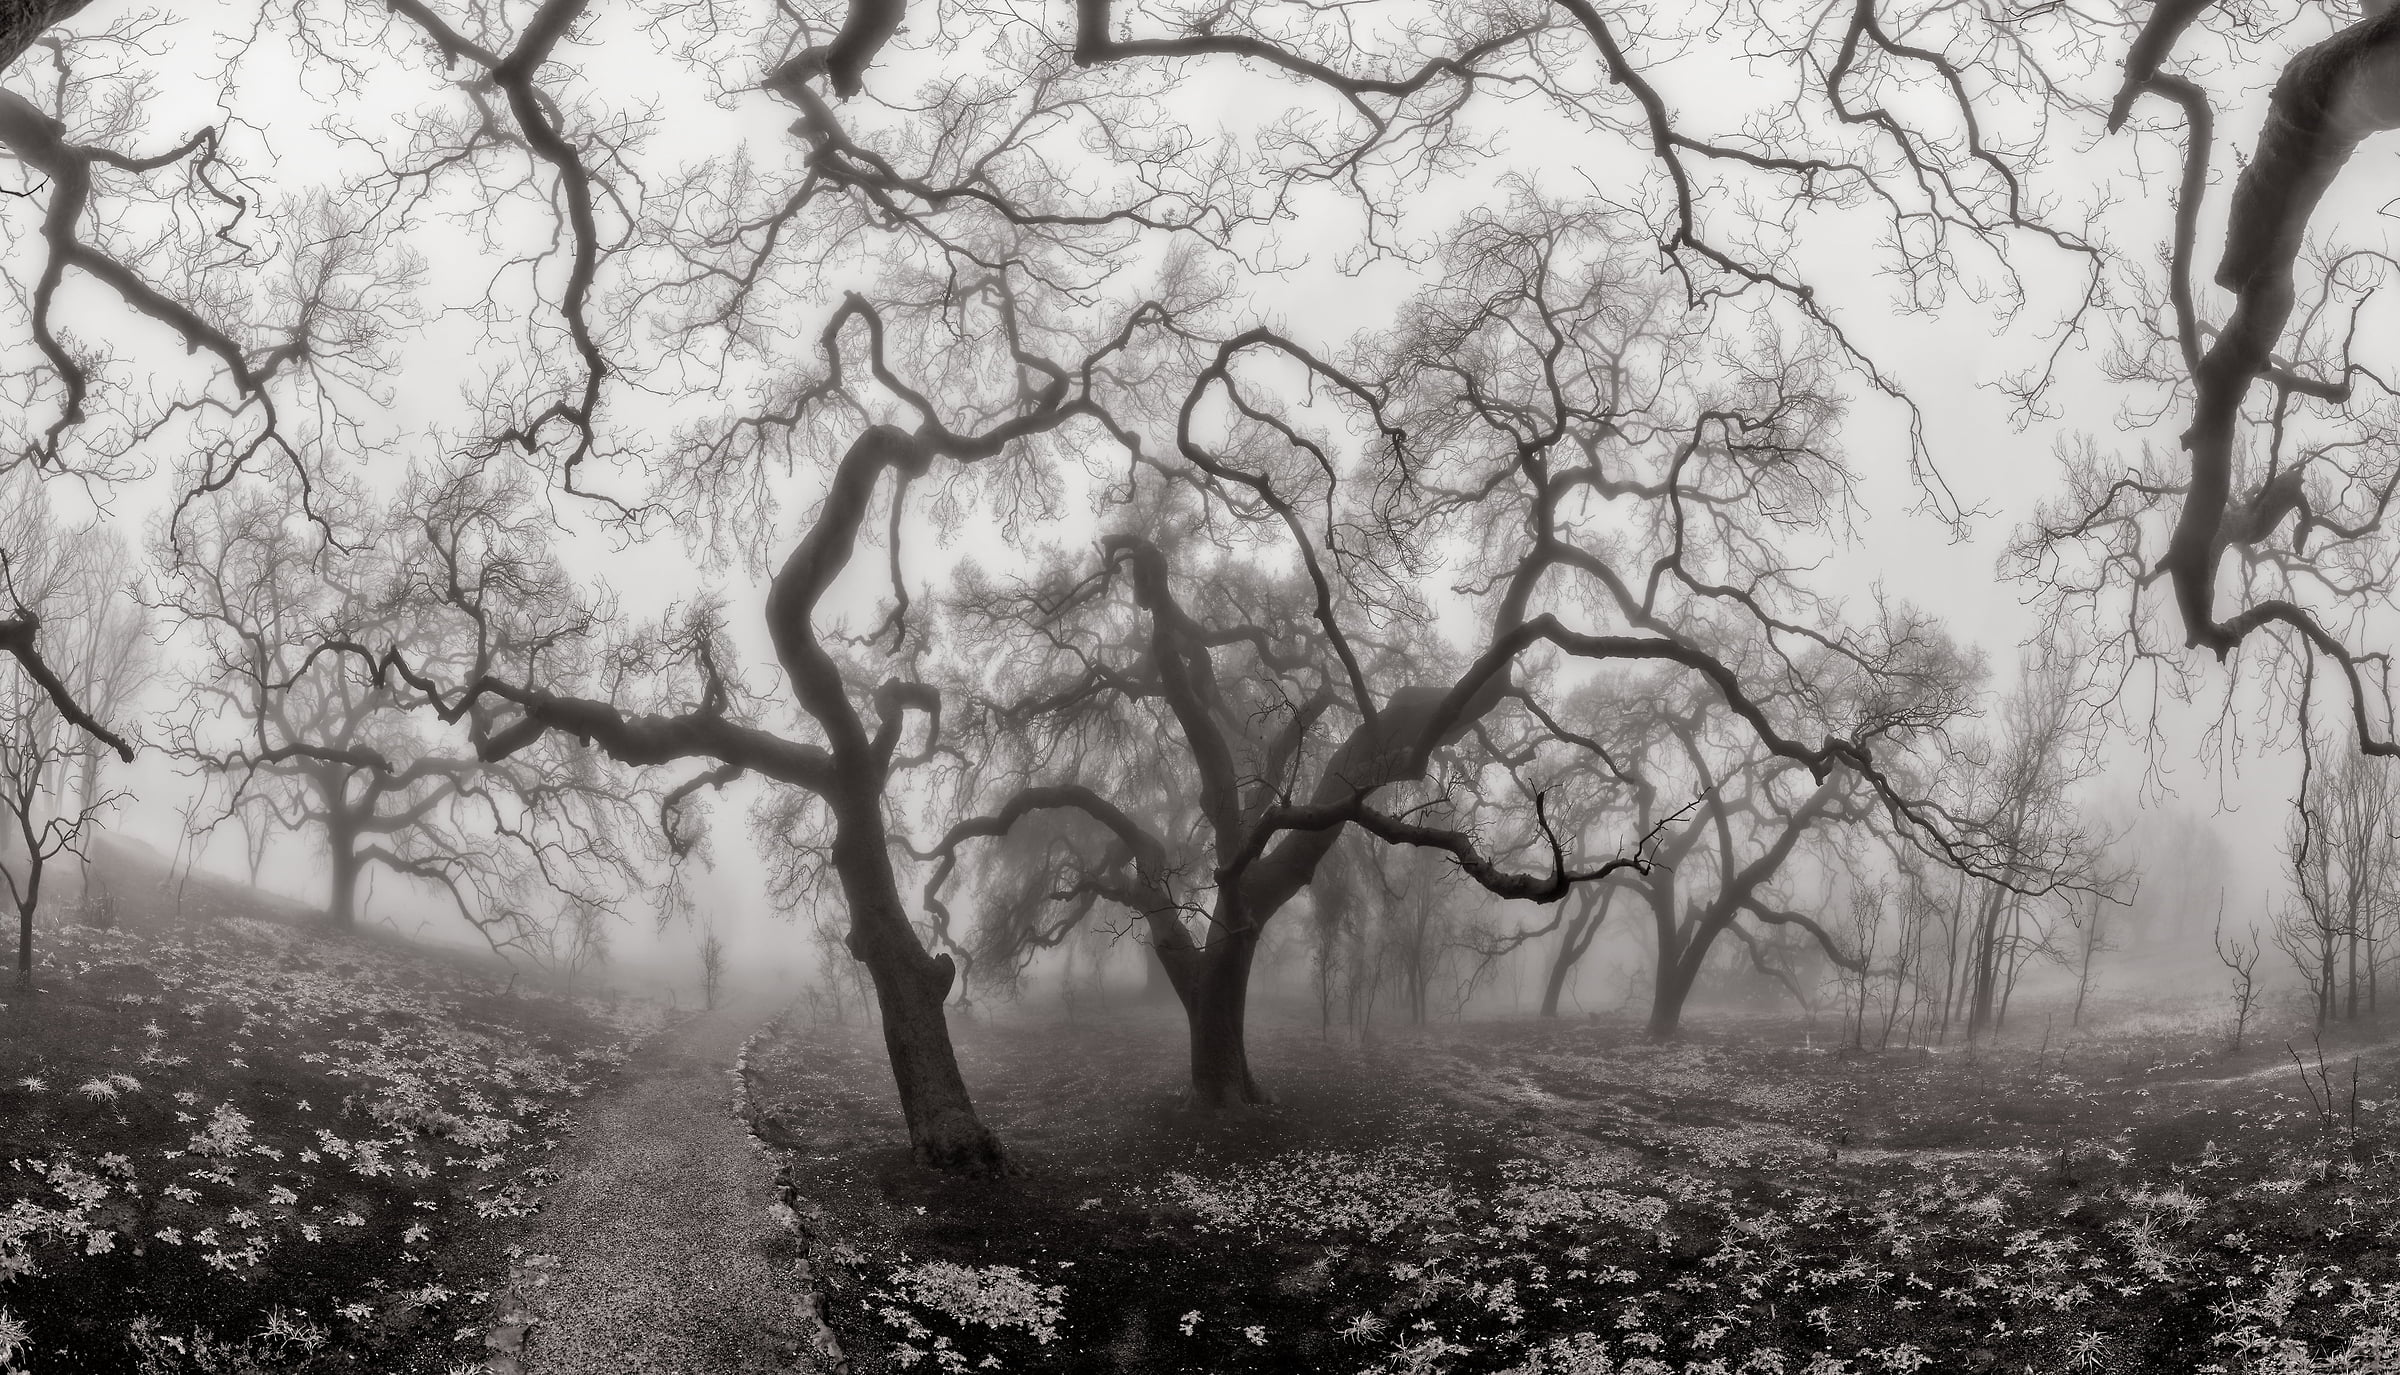 512 megapixels! A very high resolution, large-format VAST photo print of an eerie forest; photograph created by Peter Rodger in Nicolas Ridge, Malibu, California.